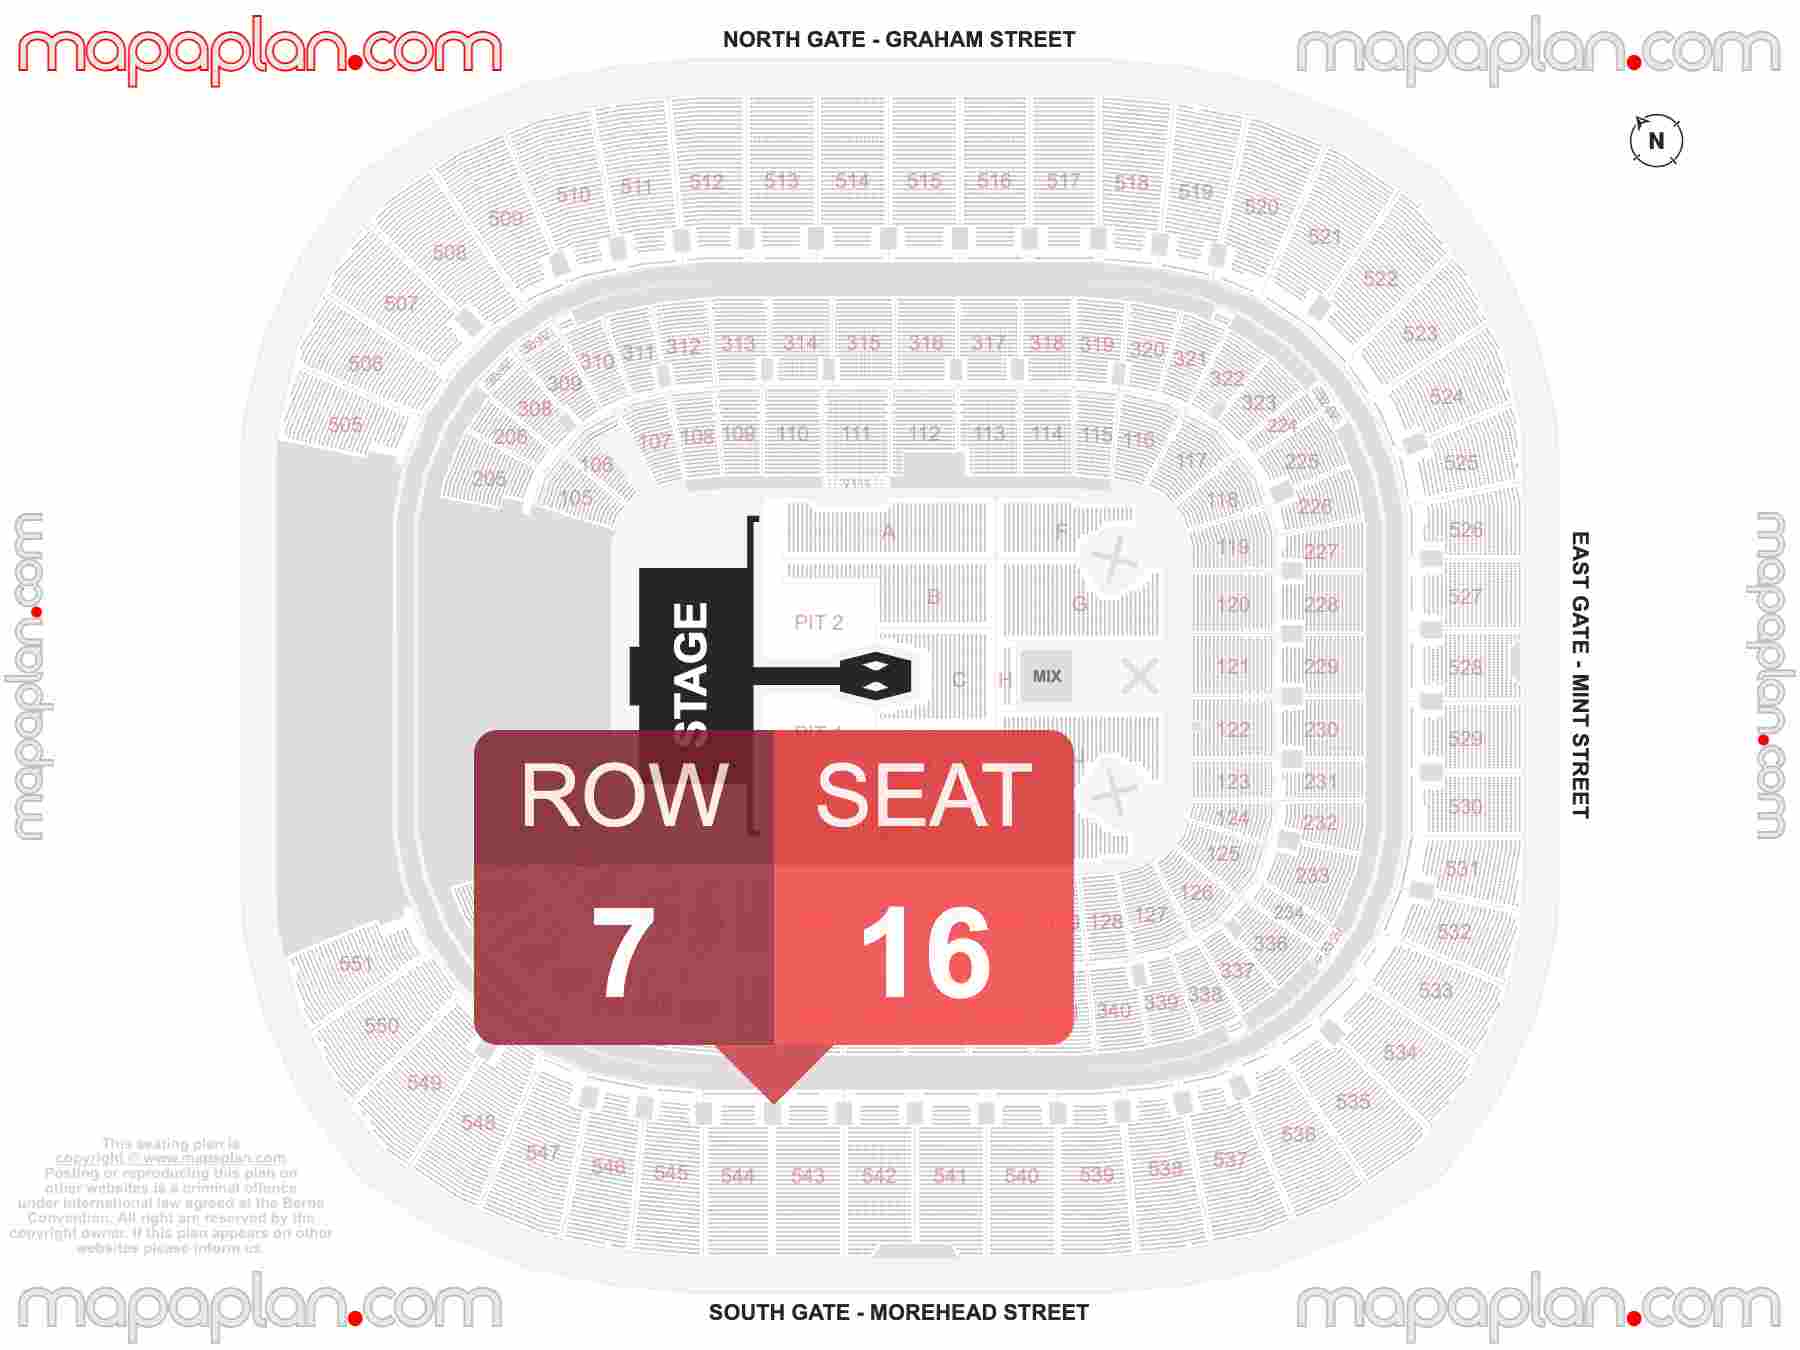 Charlotte Bank of America Stadium seating chart Concert with extended catwalk runway B-stage seating chart with exact section numbers showing best rows and seats selection 3d layout - Best interactive seat finder tool with precise detailed location data